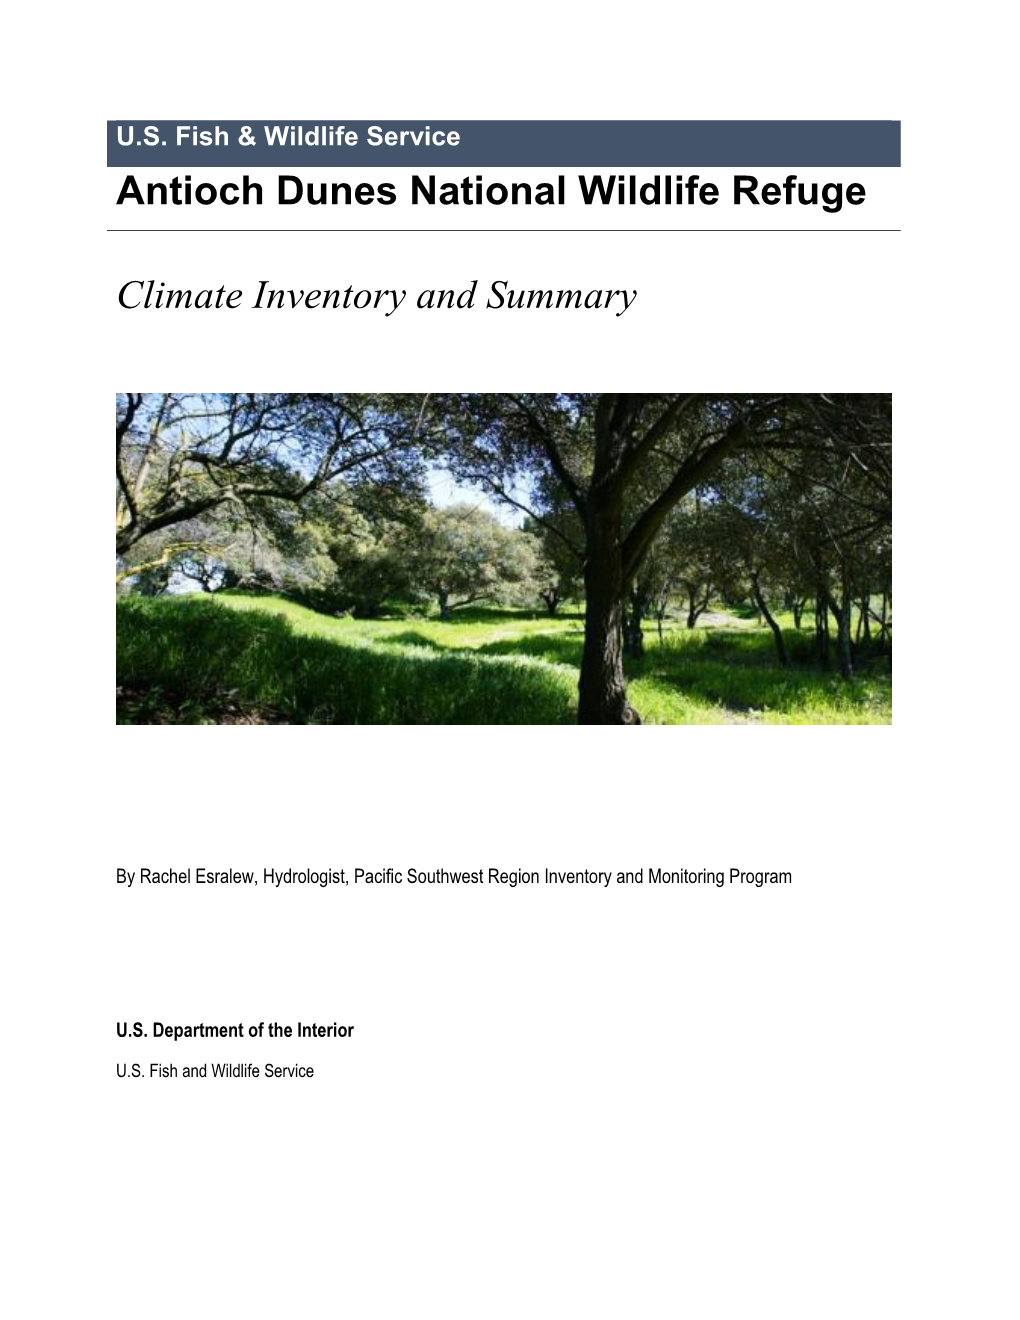 Antioch Dunes National Wildlife Refuge Climate Inventory and Summary